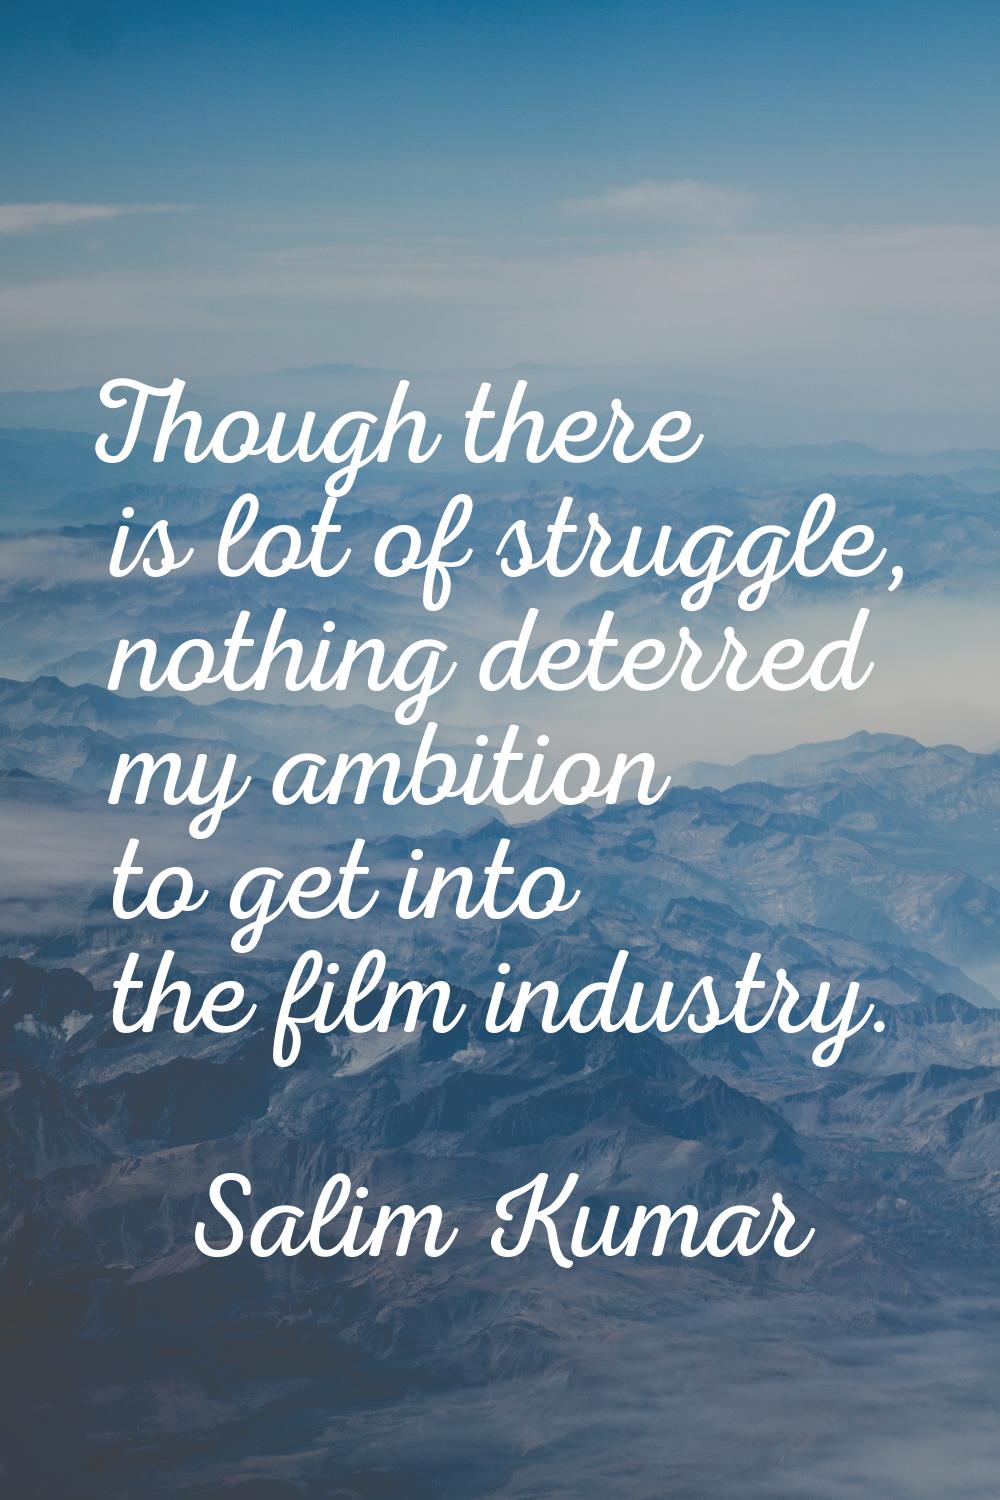 Though there is lot of struggle, nothing deterred my ambition to get into the film industry.